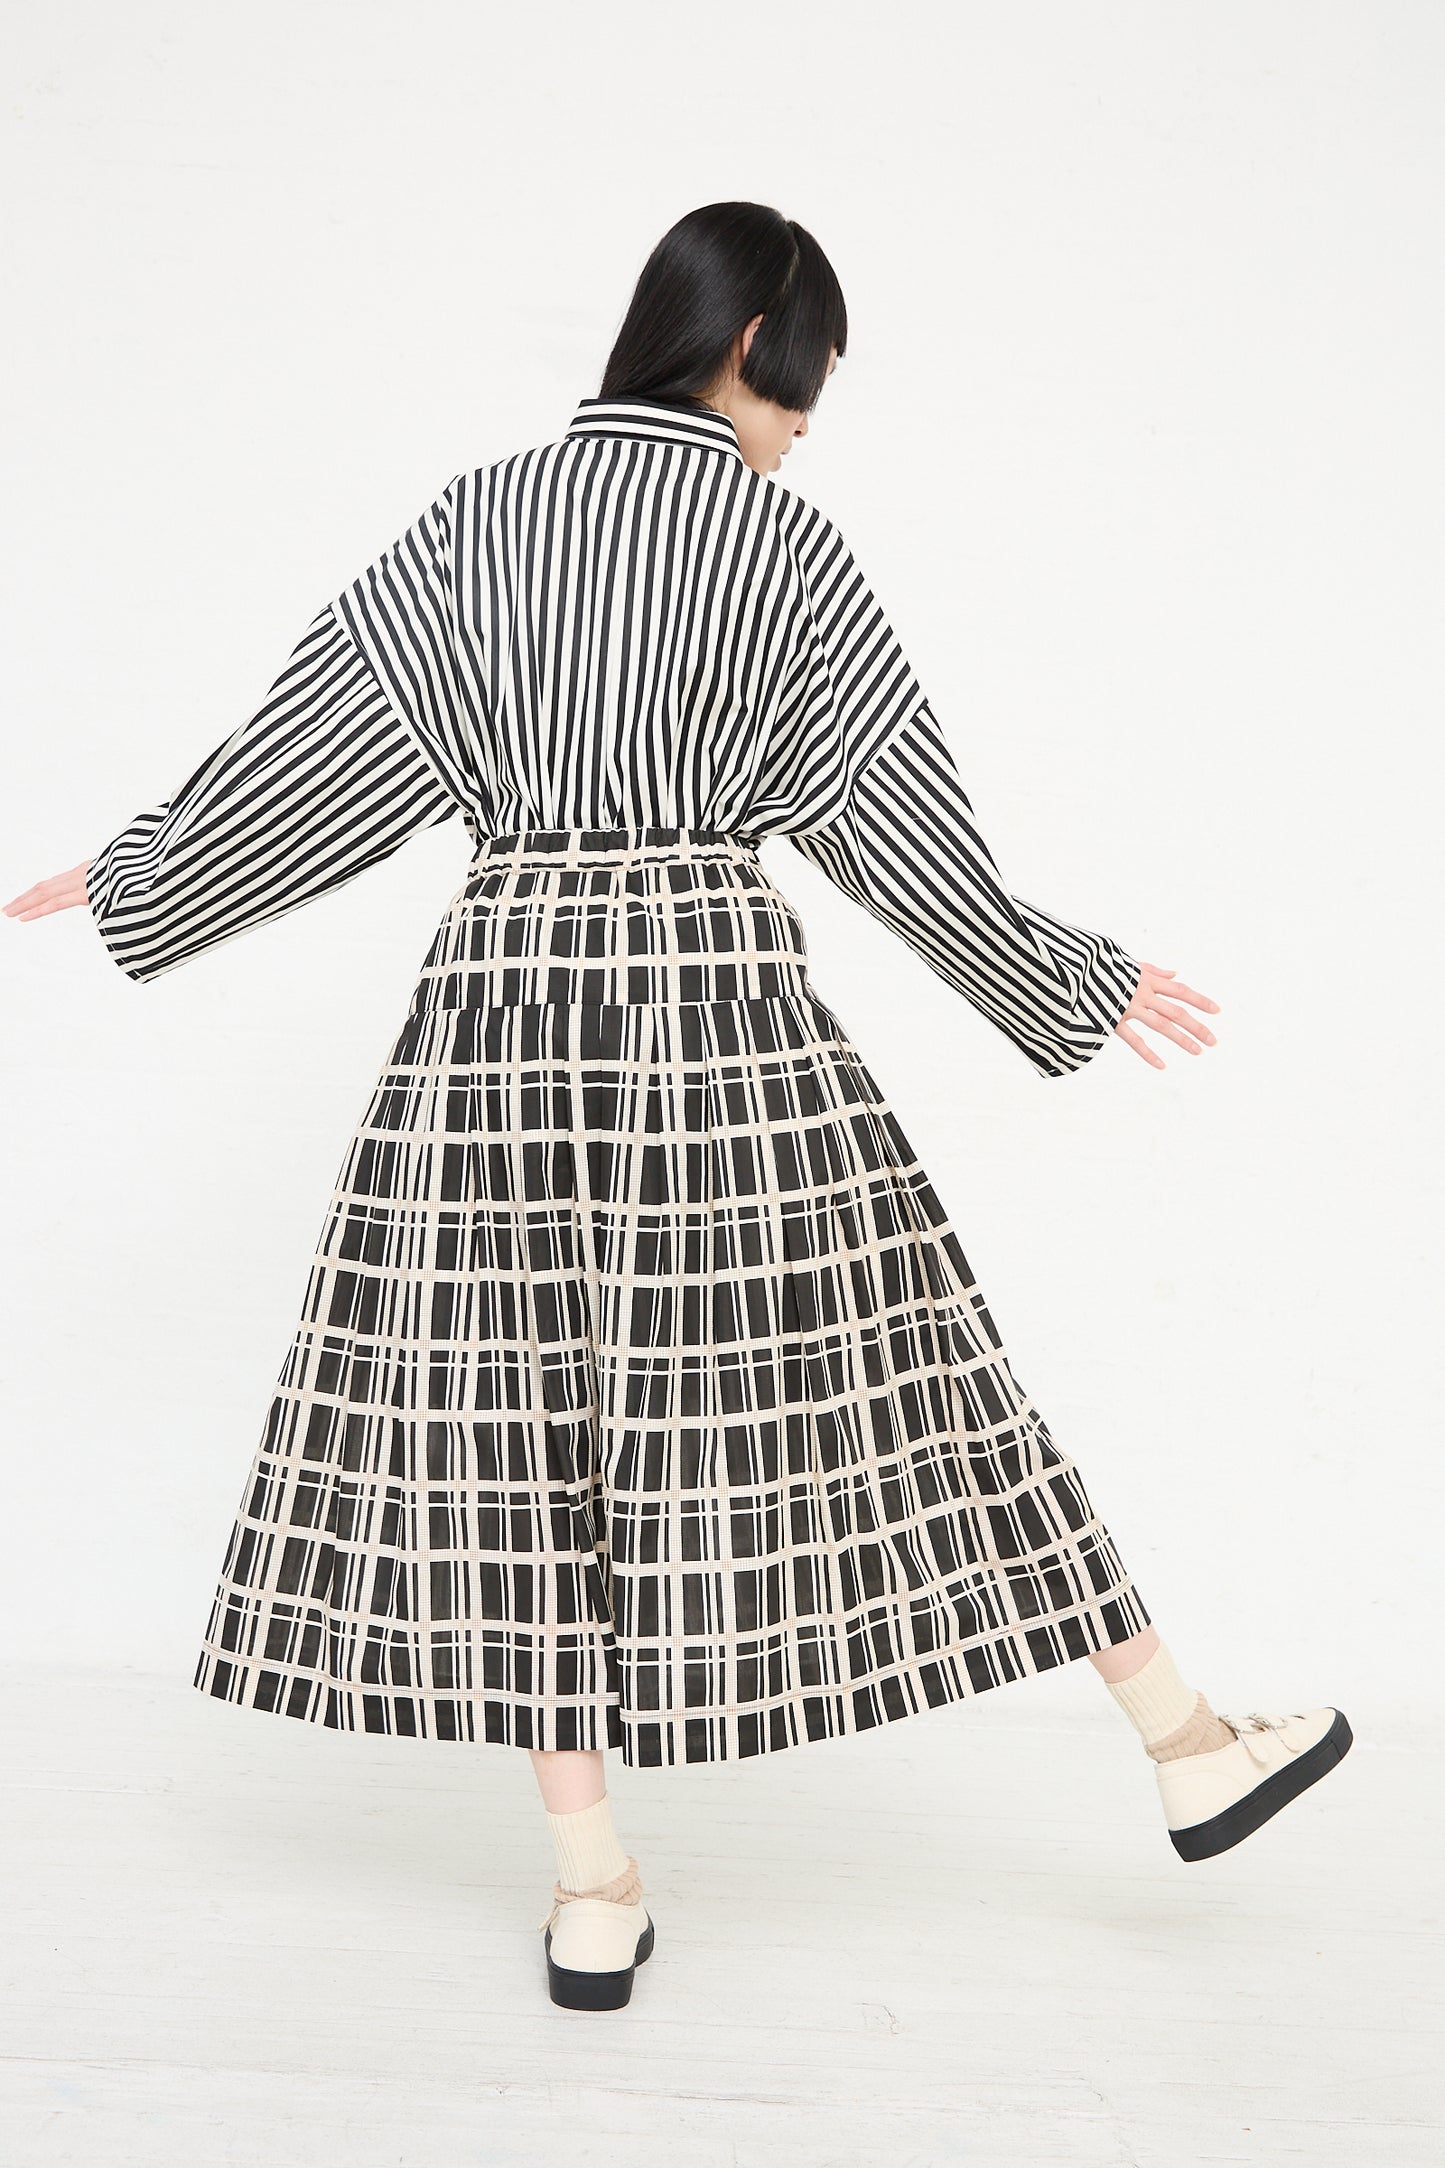 Woman in KasMaria's Cotton Pleated Long Skirt in Grid Print outfit walking away from the camera.